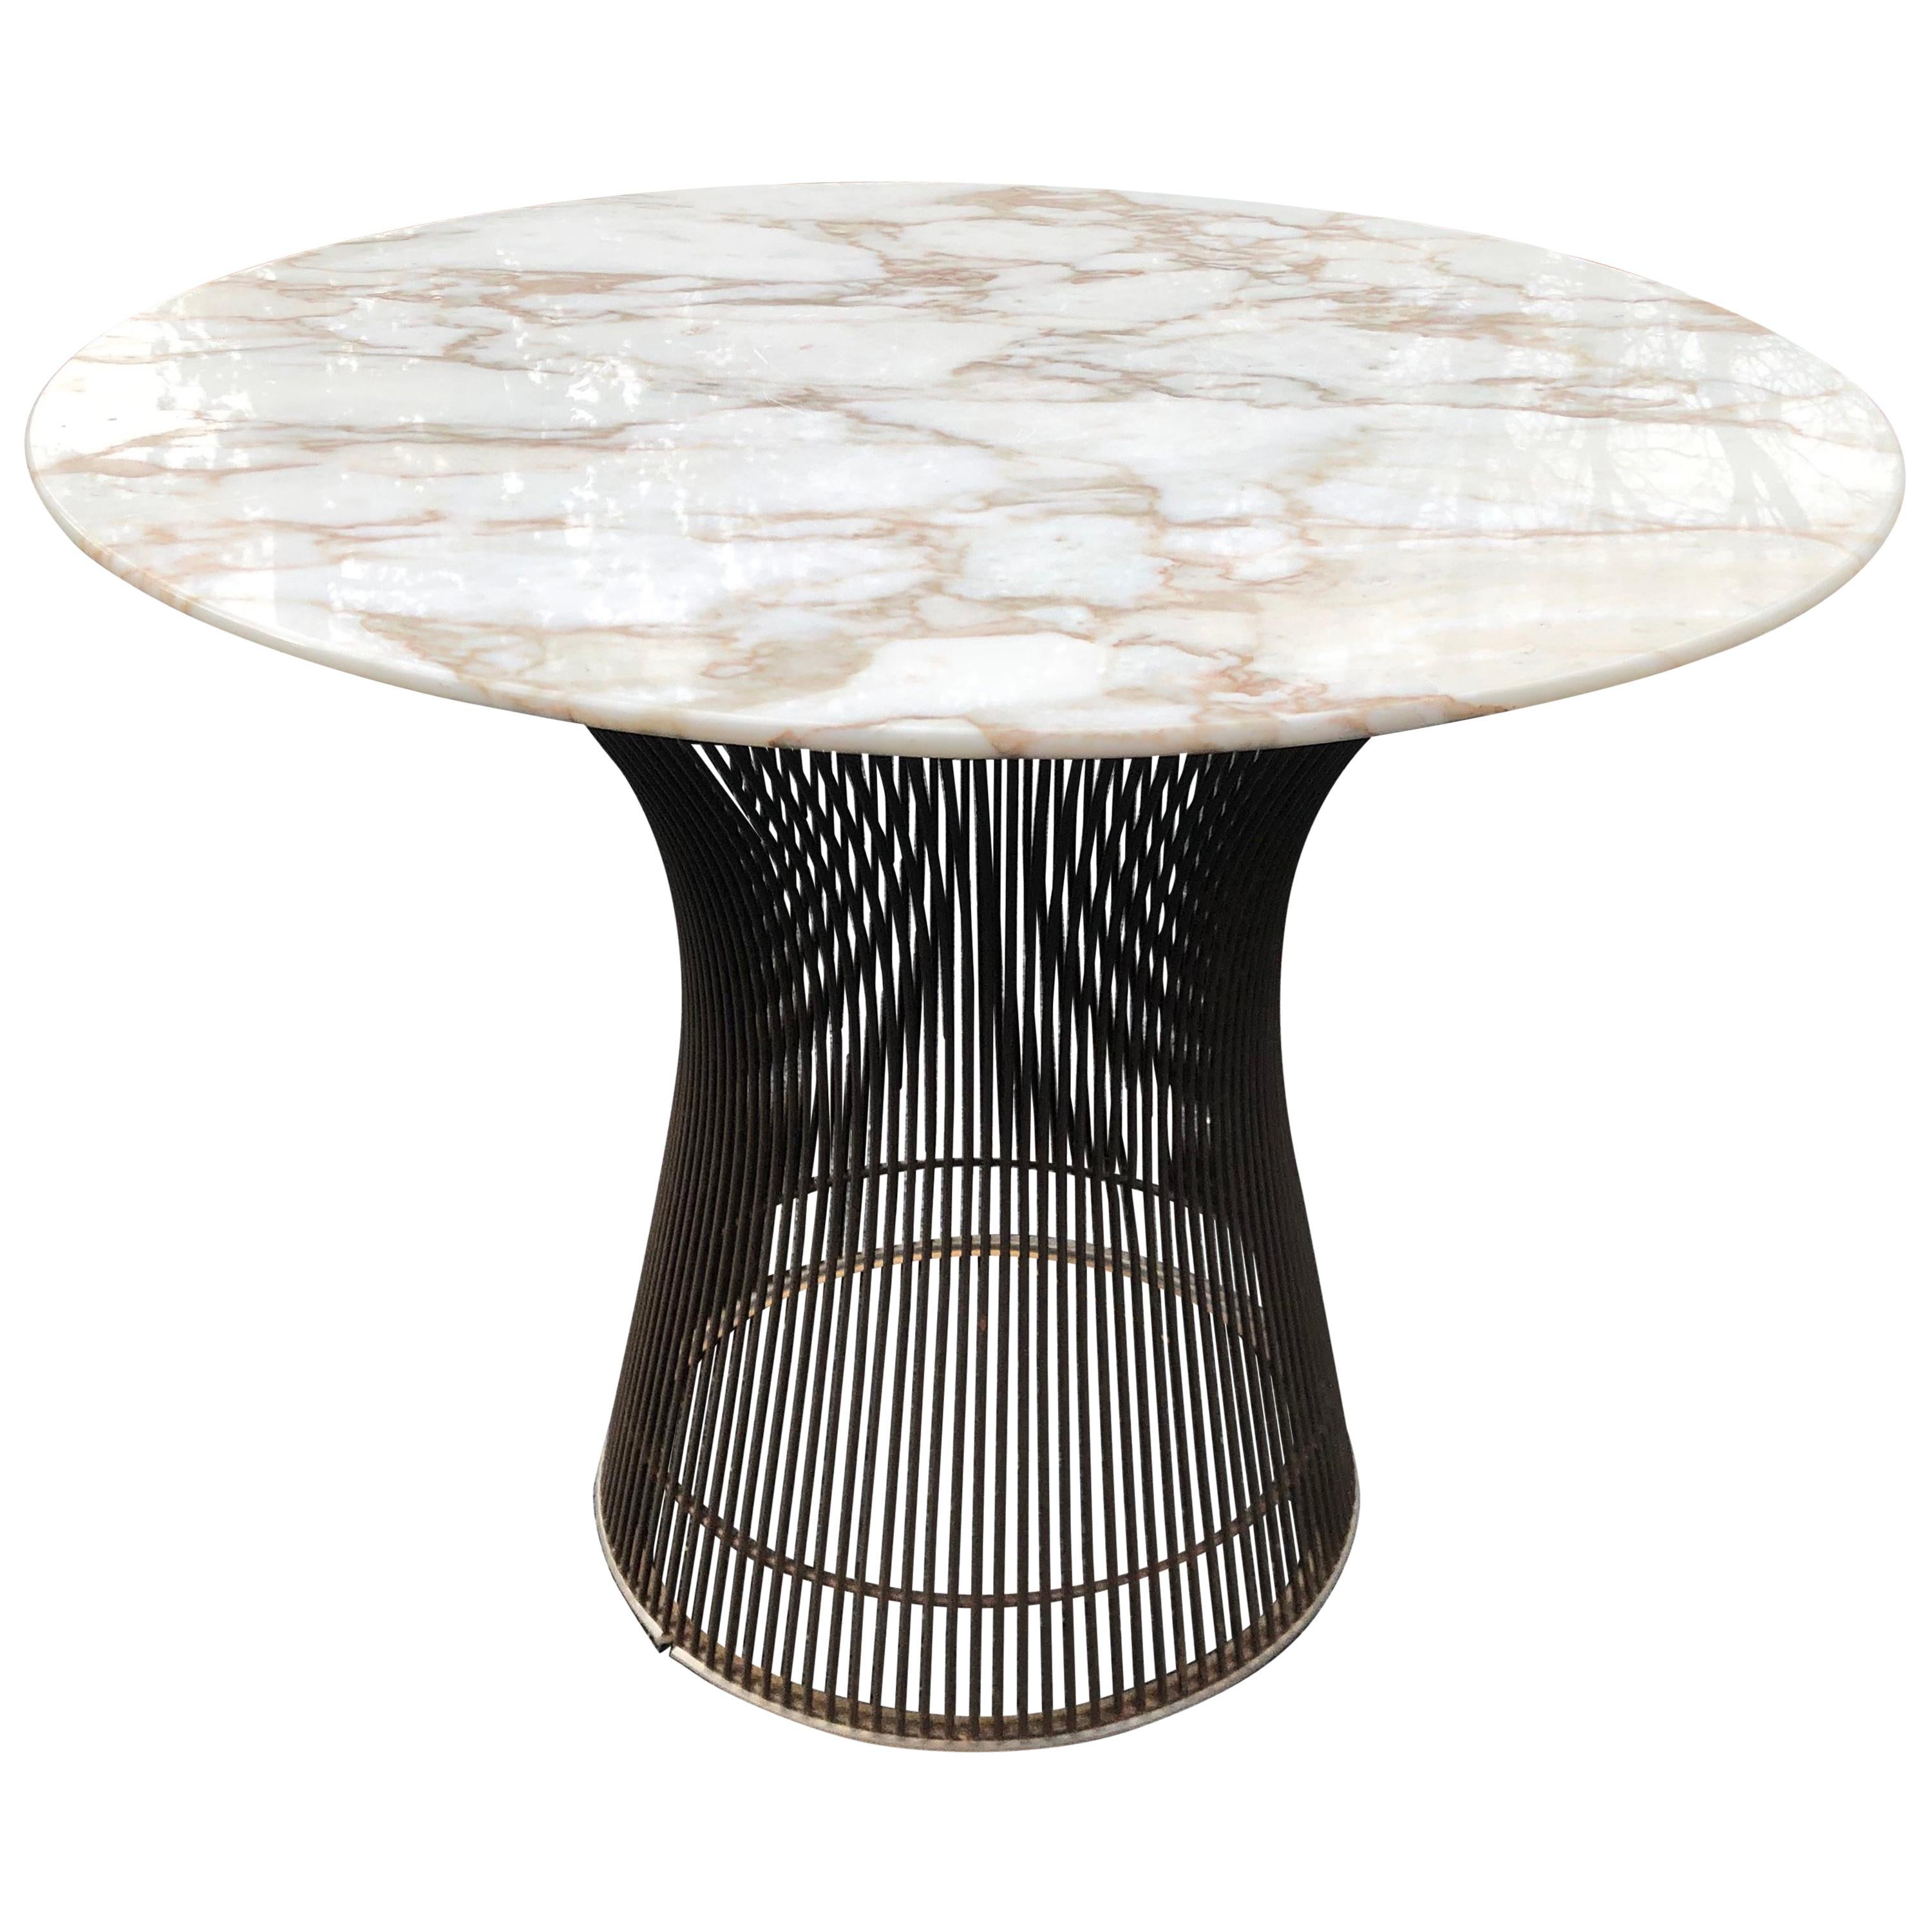 Warren Platner Side Table for Knoll, with Carrara Marble